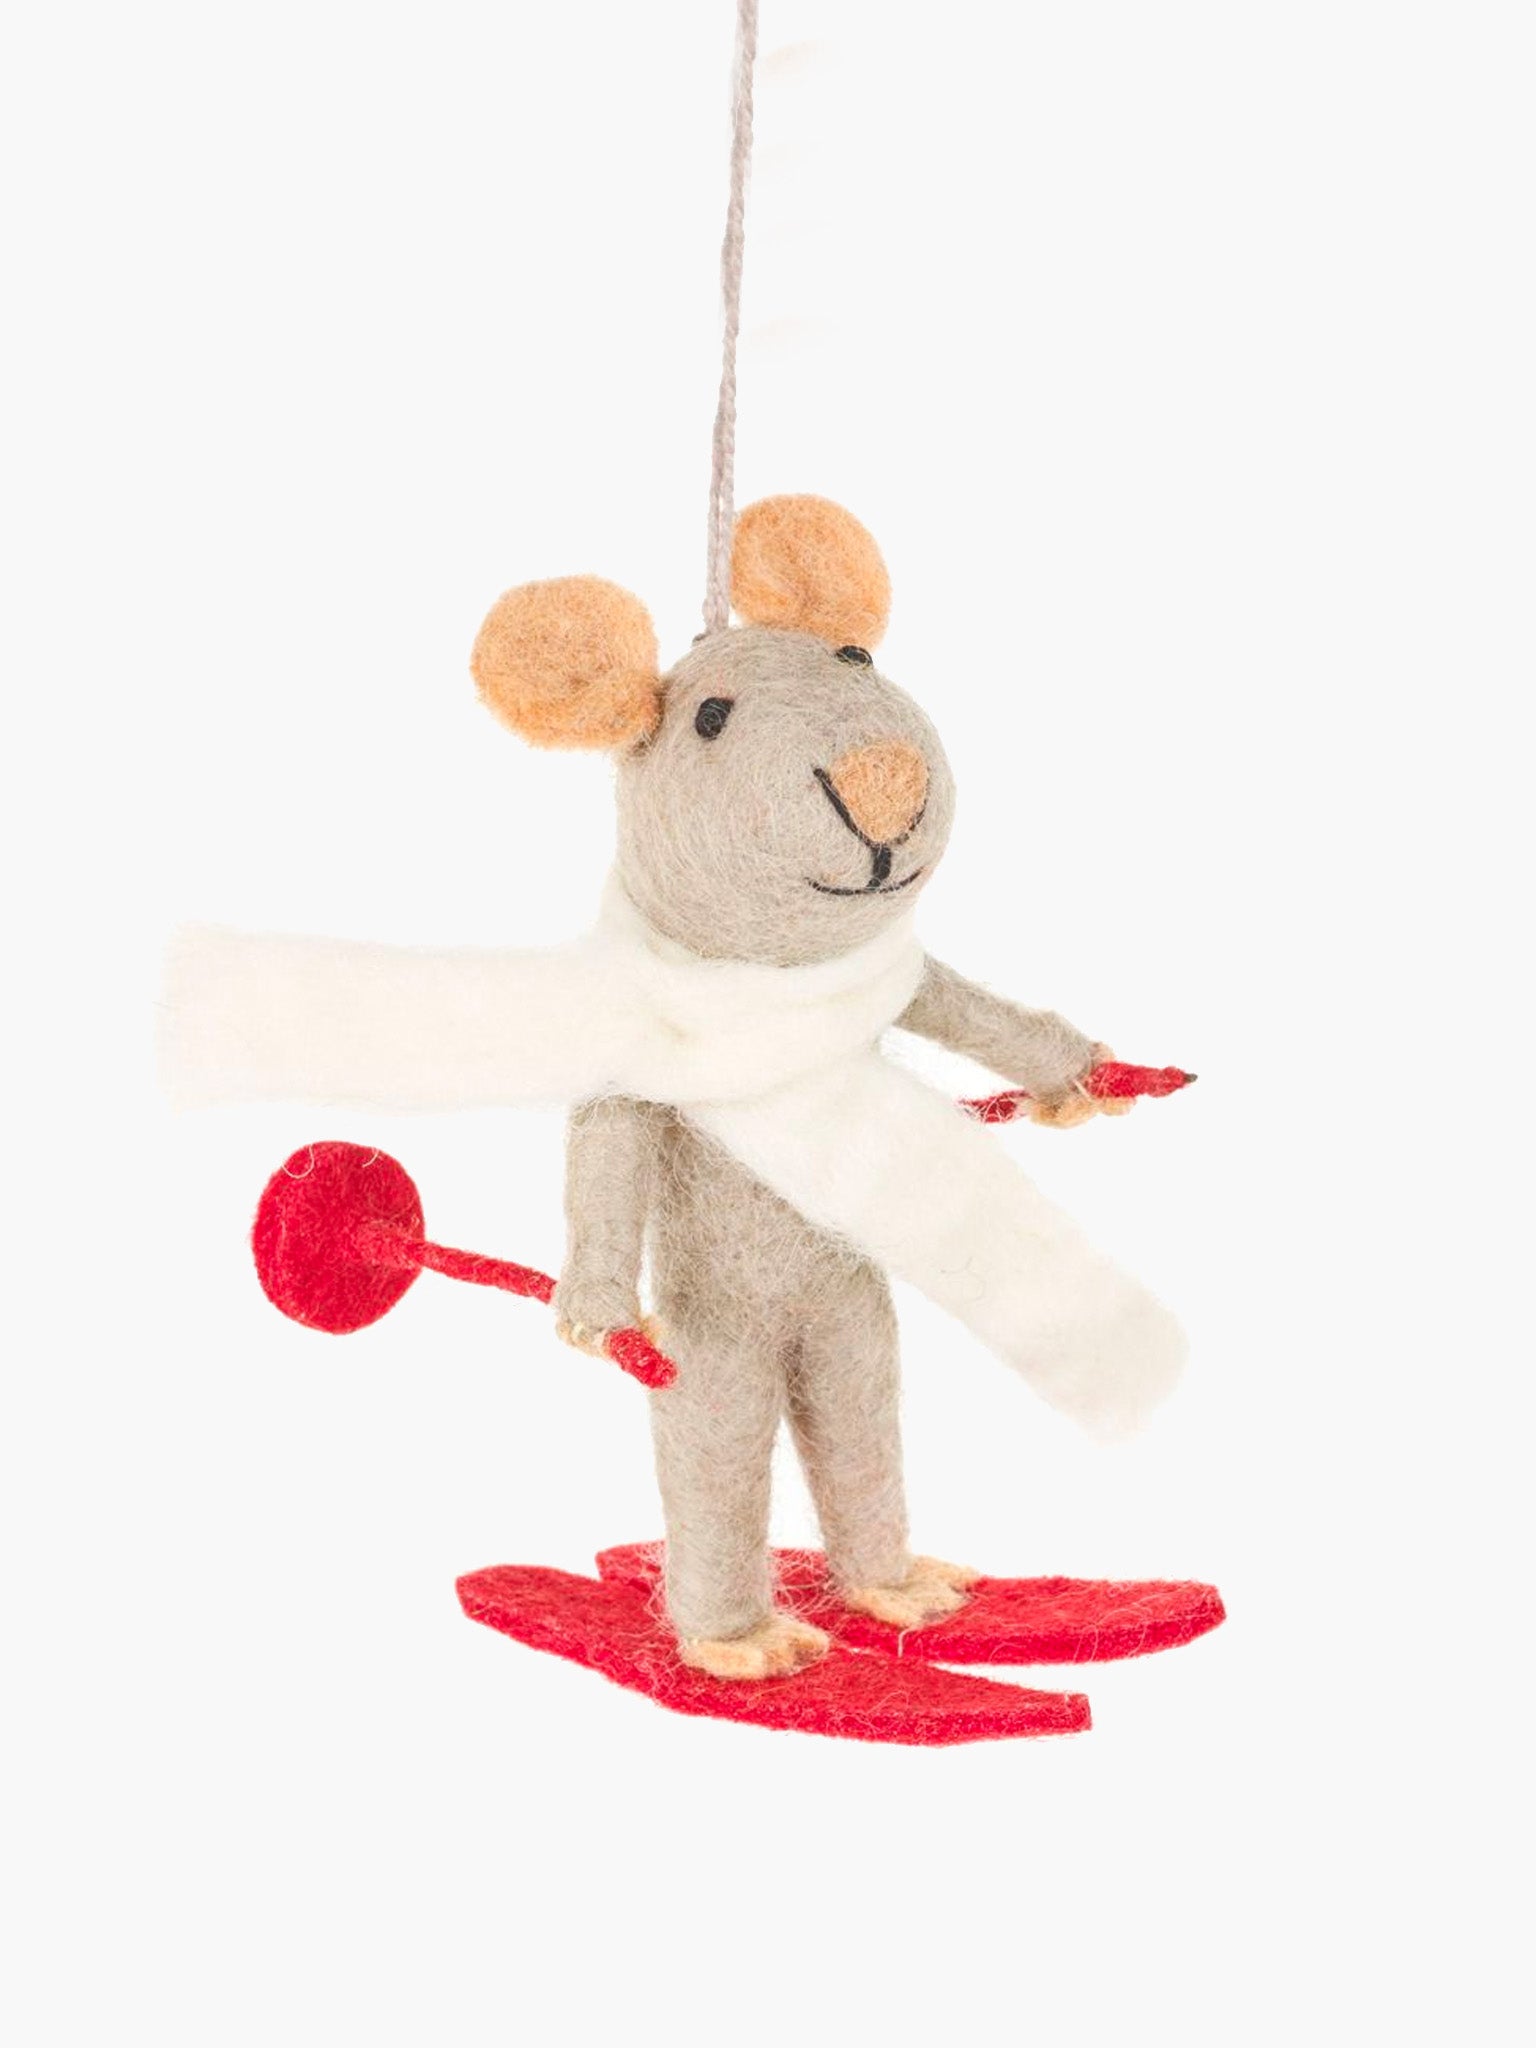 Marcel the Mouse Ornament